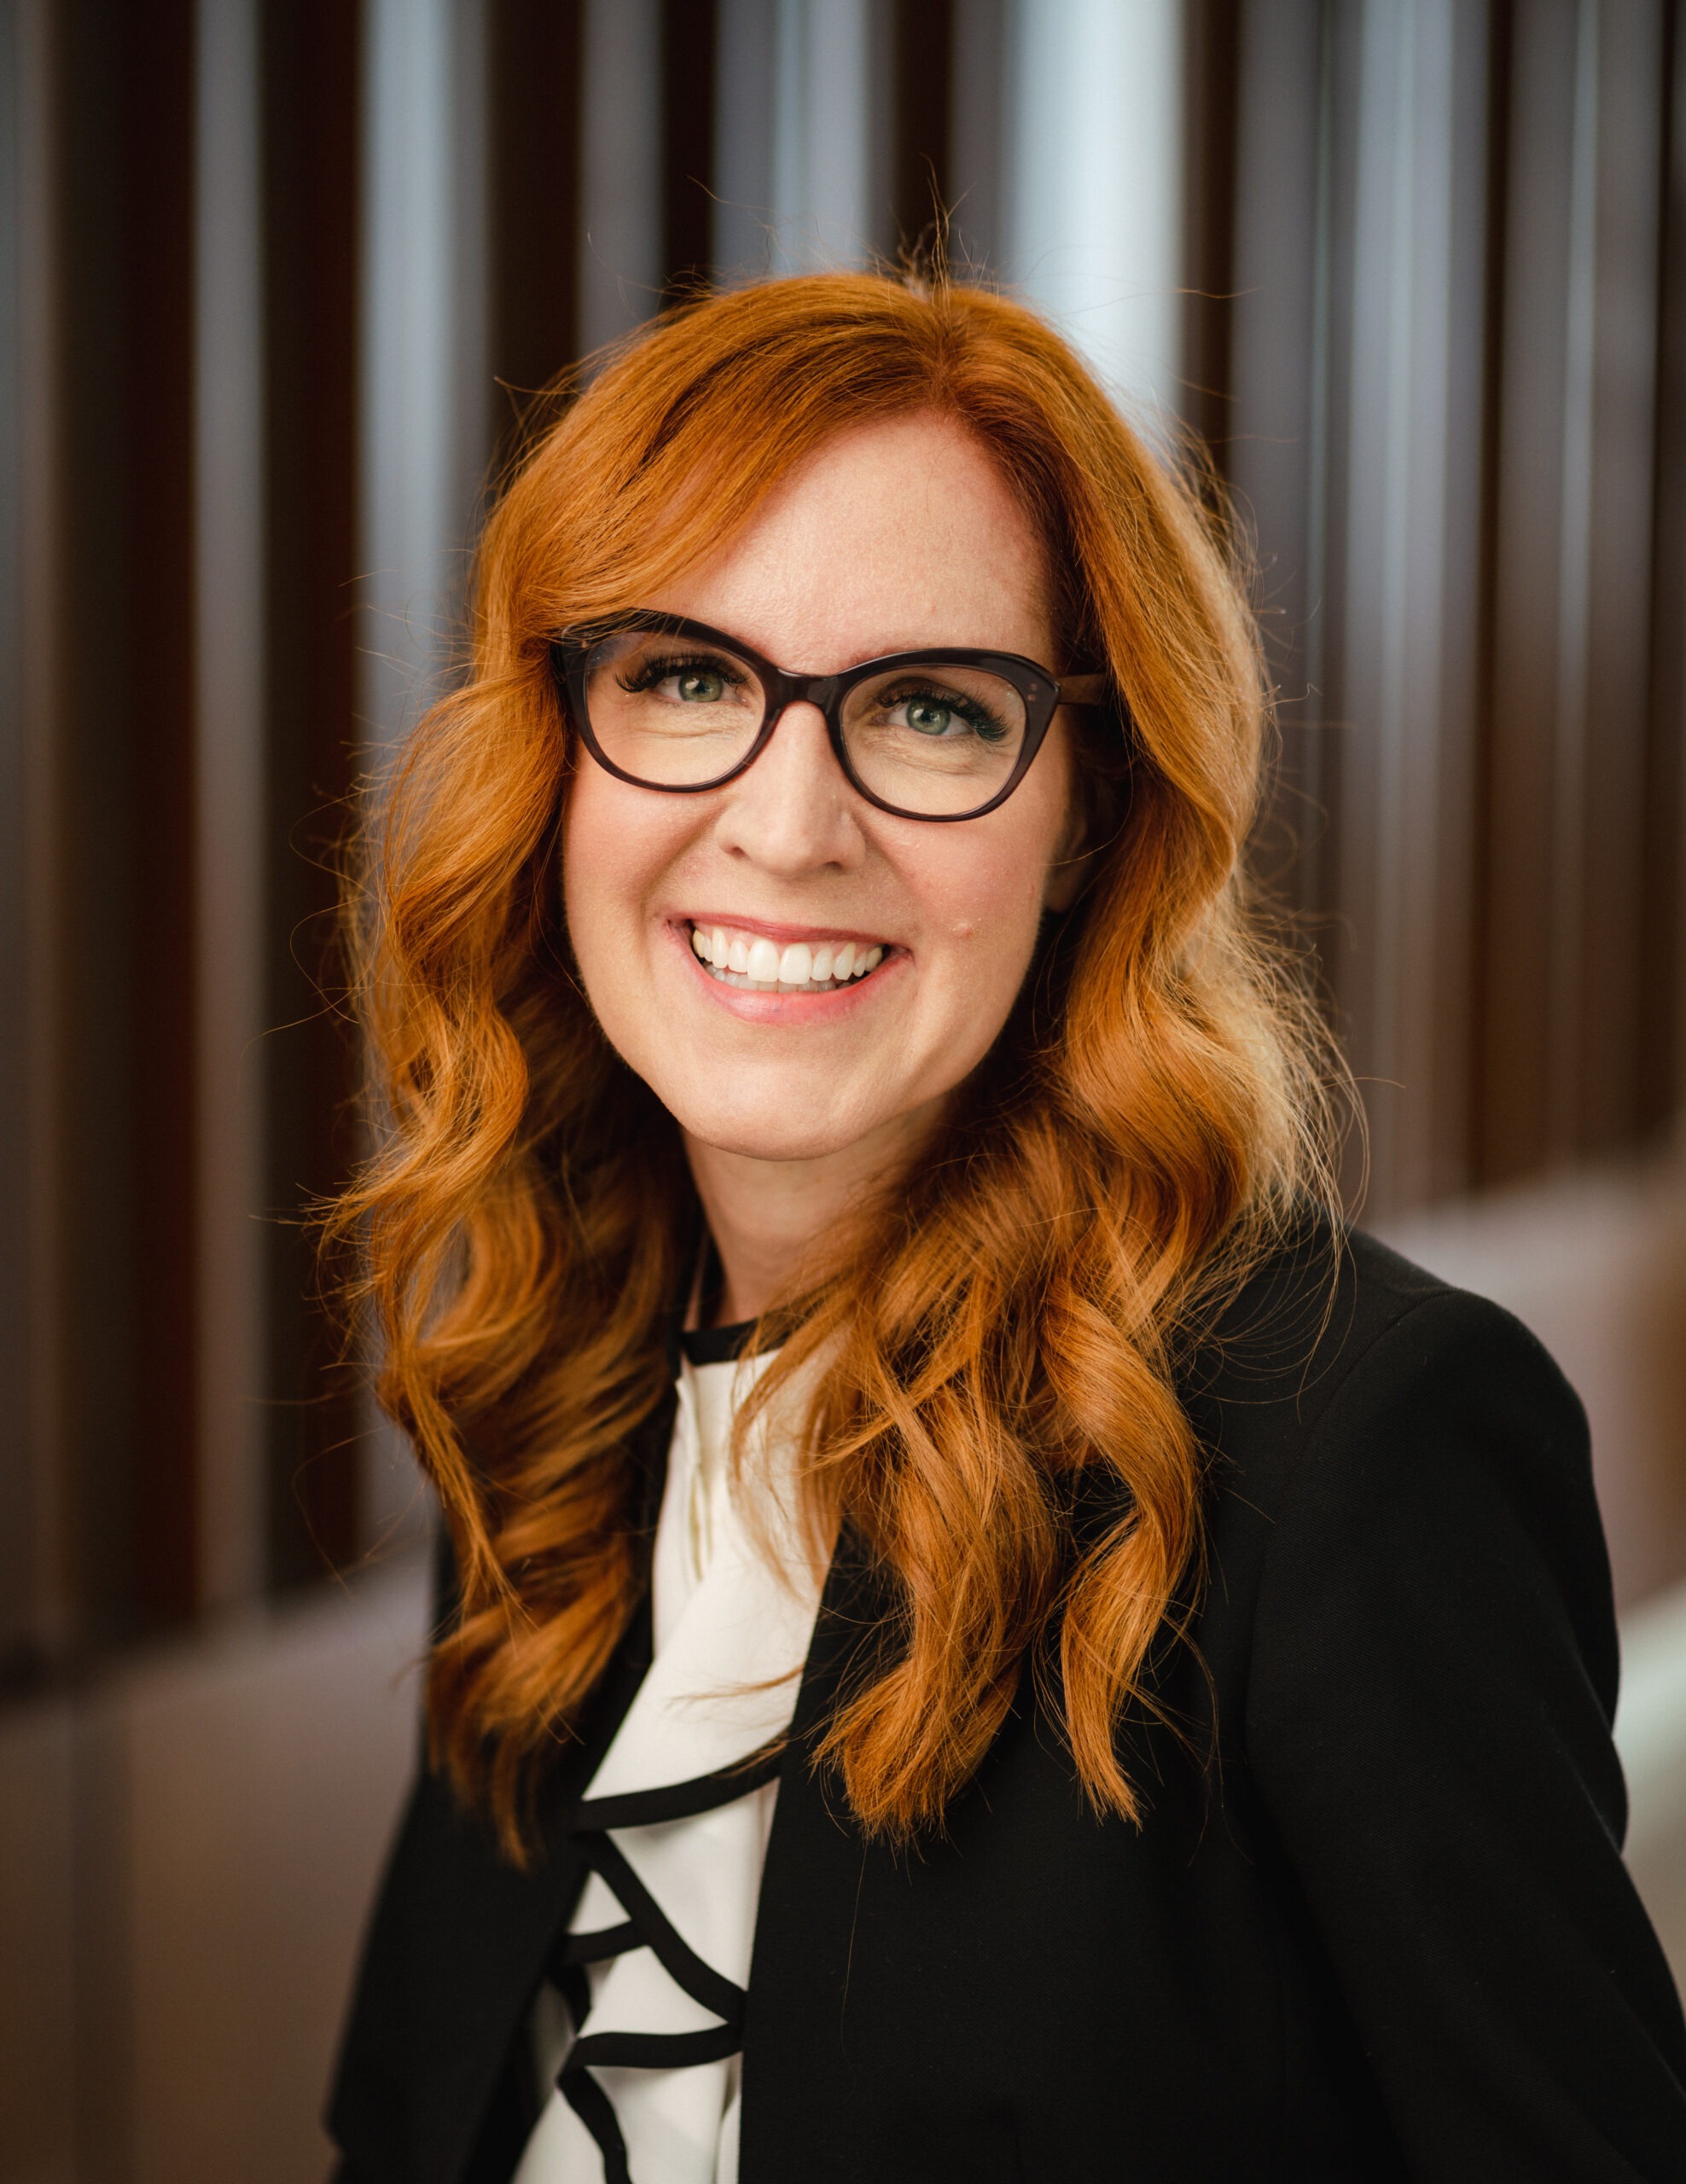 Professor RonNell Andersen Jones, a white woman with long, wavy red hair wearing glasses and a black blazer